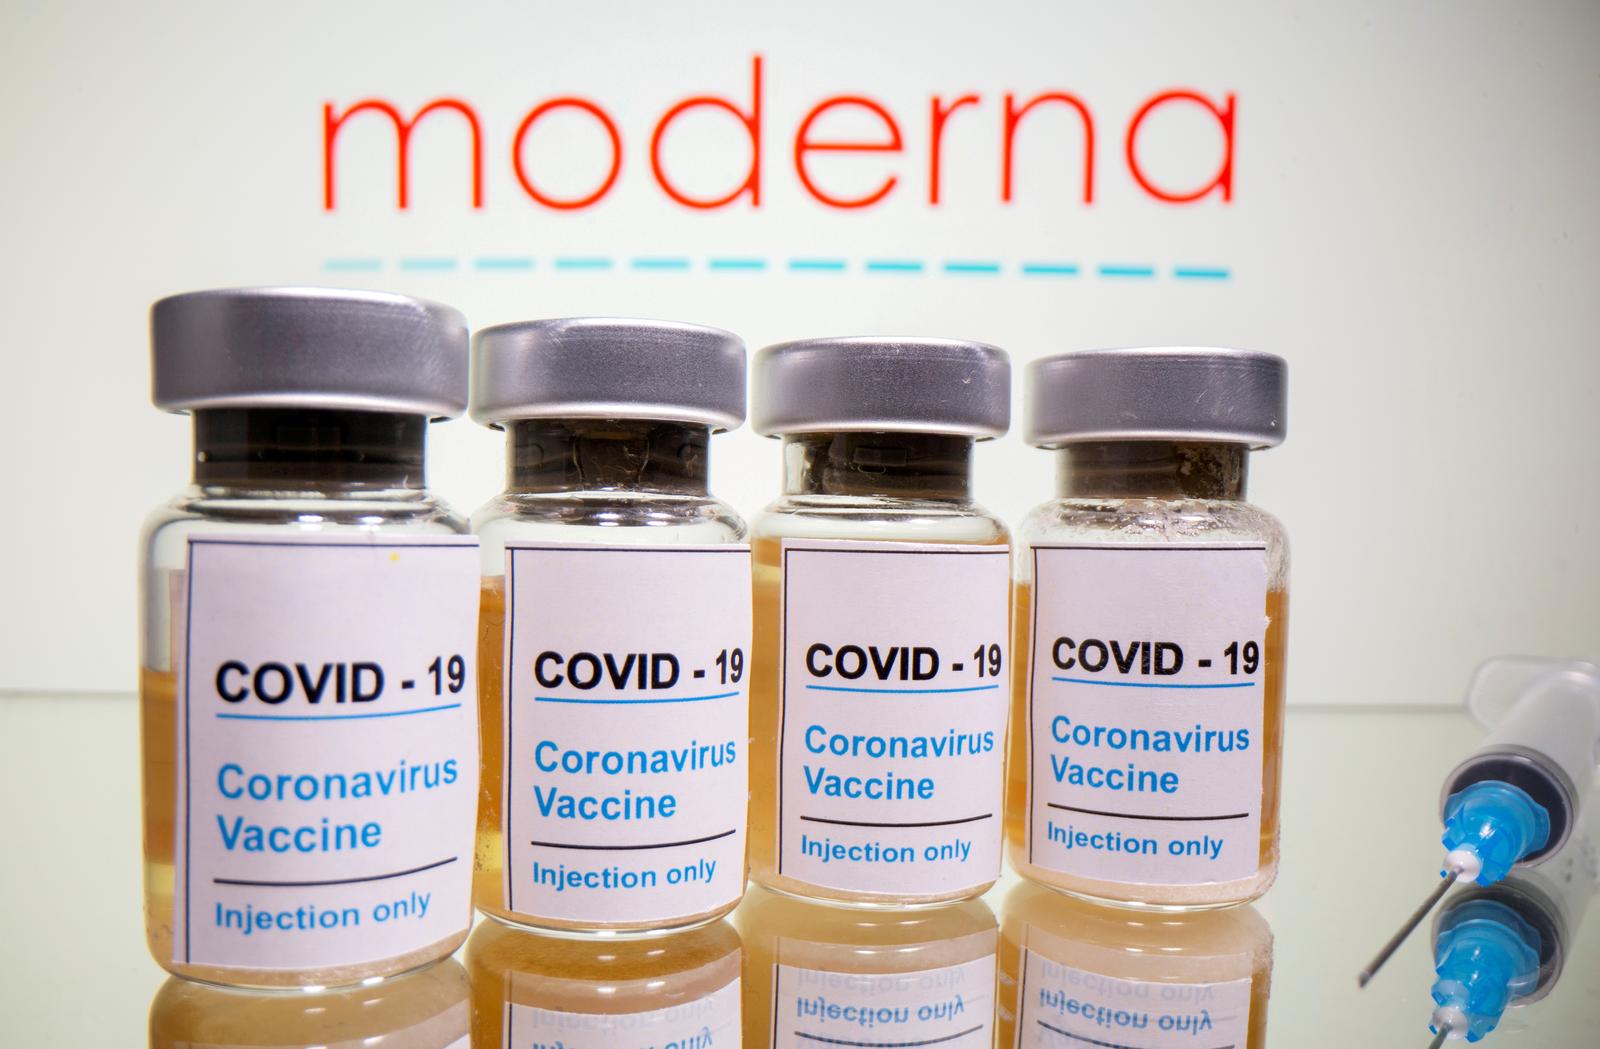 Moderna says possible allergic reactions to COVID-19 vaccine under investigation